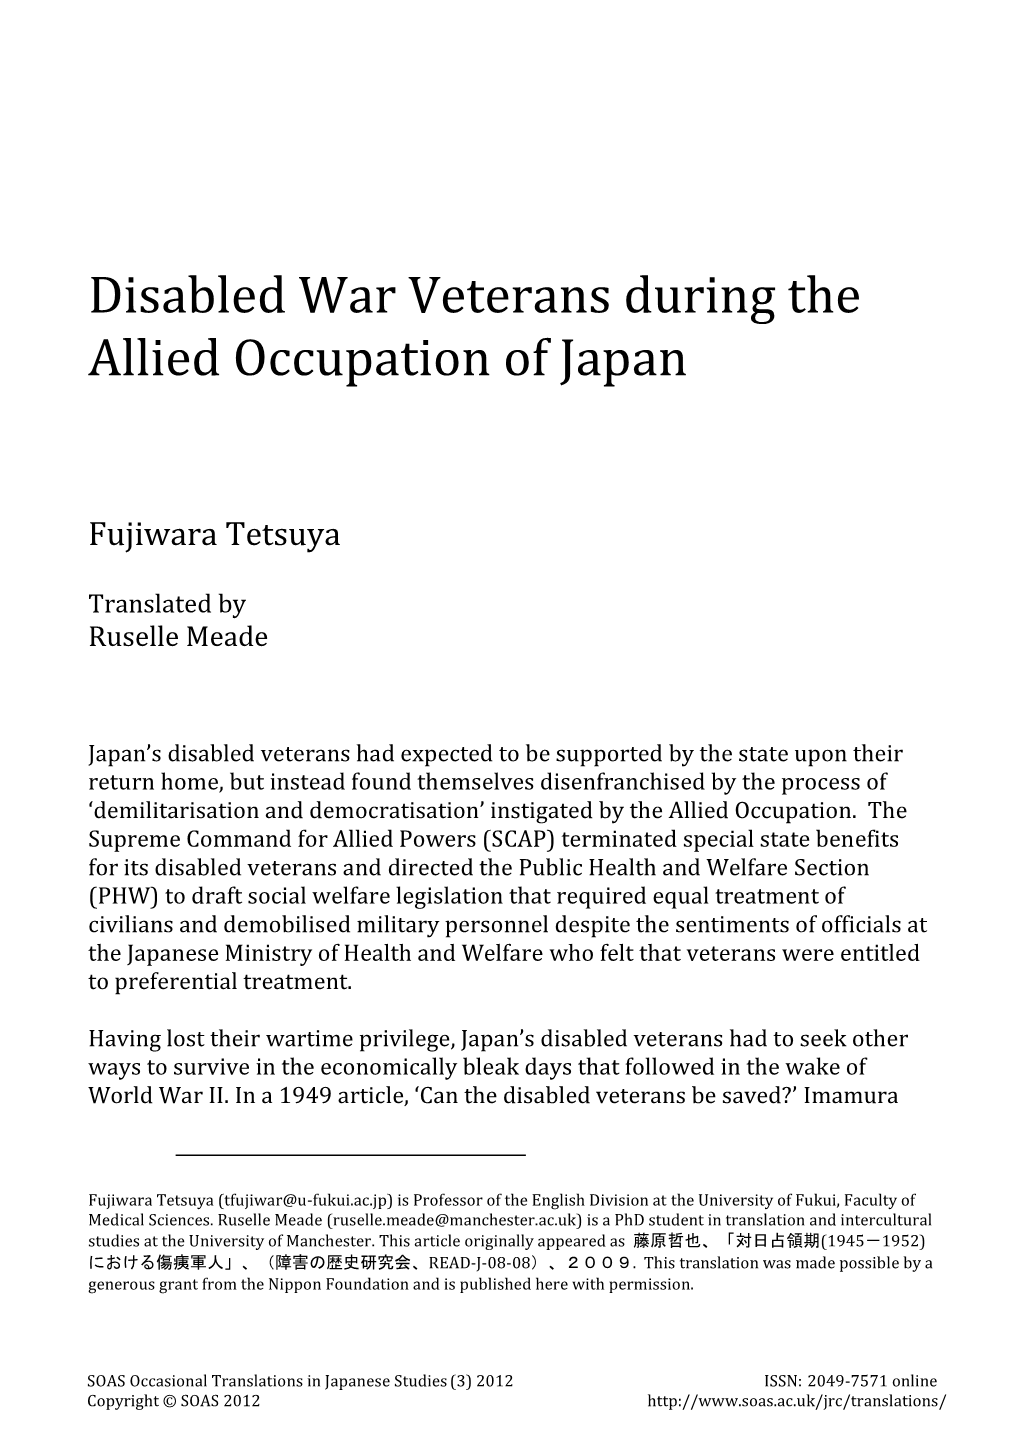 Disabled War Veterans During the Allied Occupation of Japan